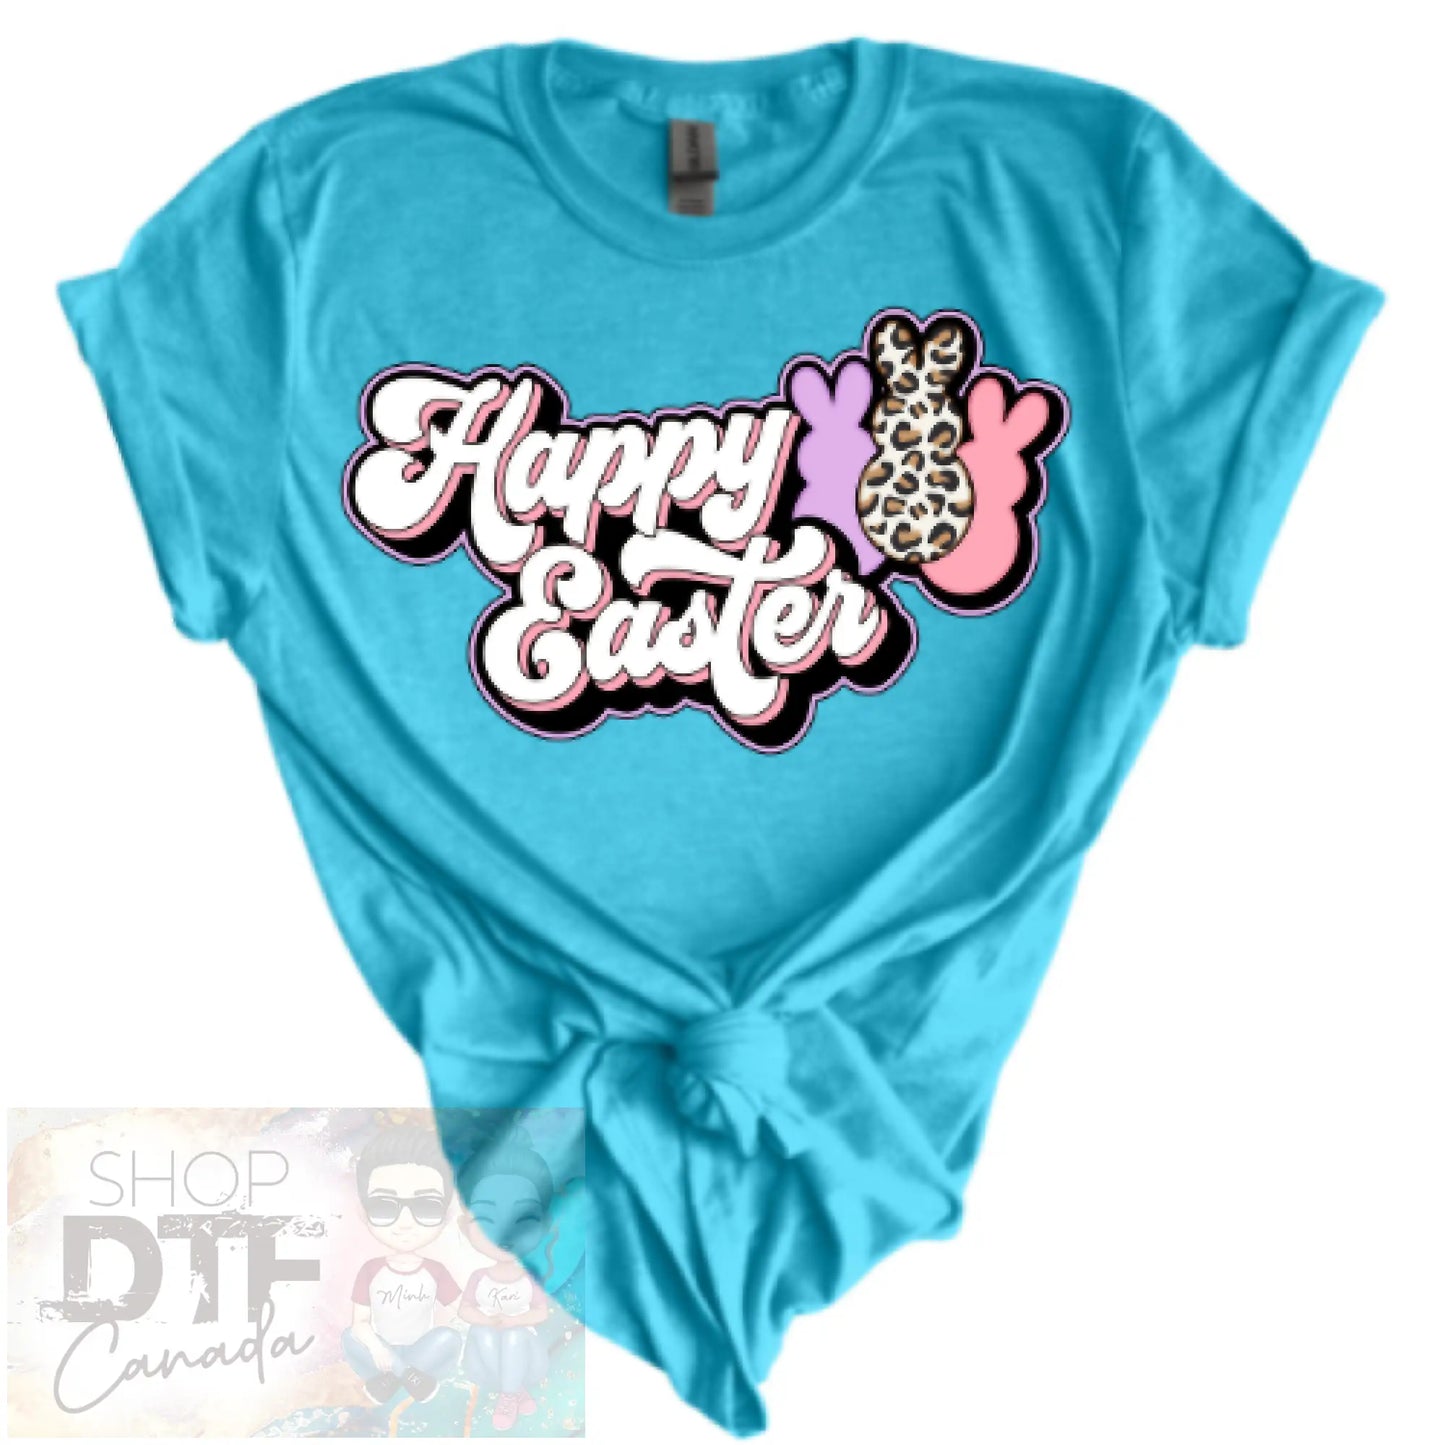 Easter - Happy Easter 1 - Shirts & Tops